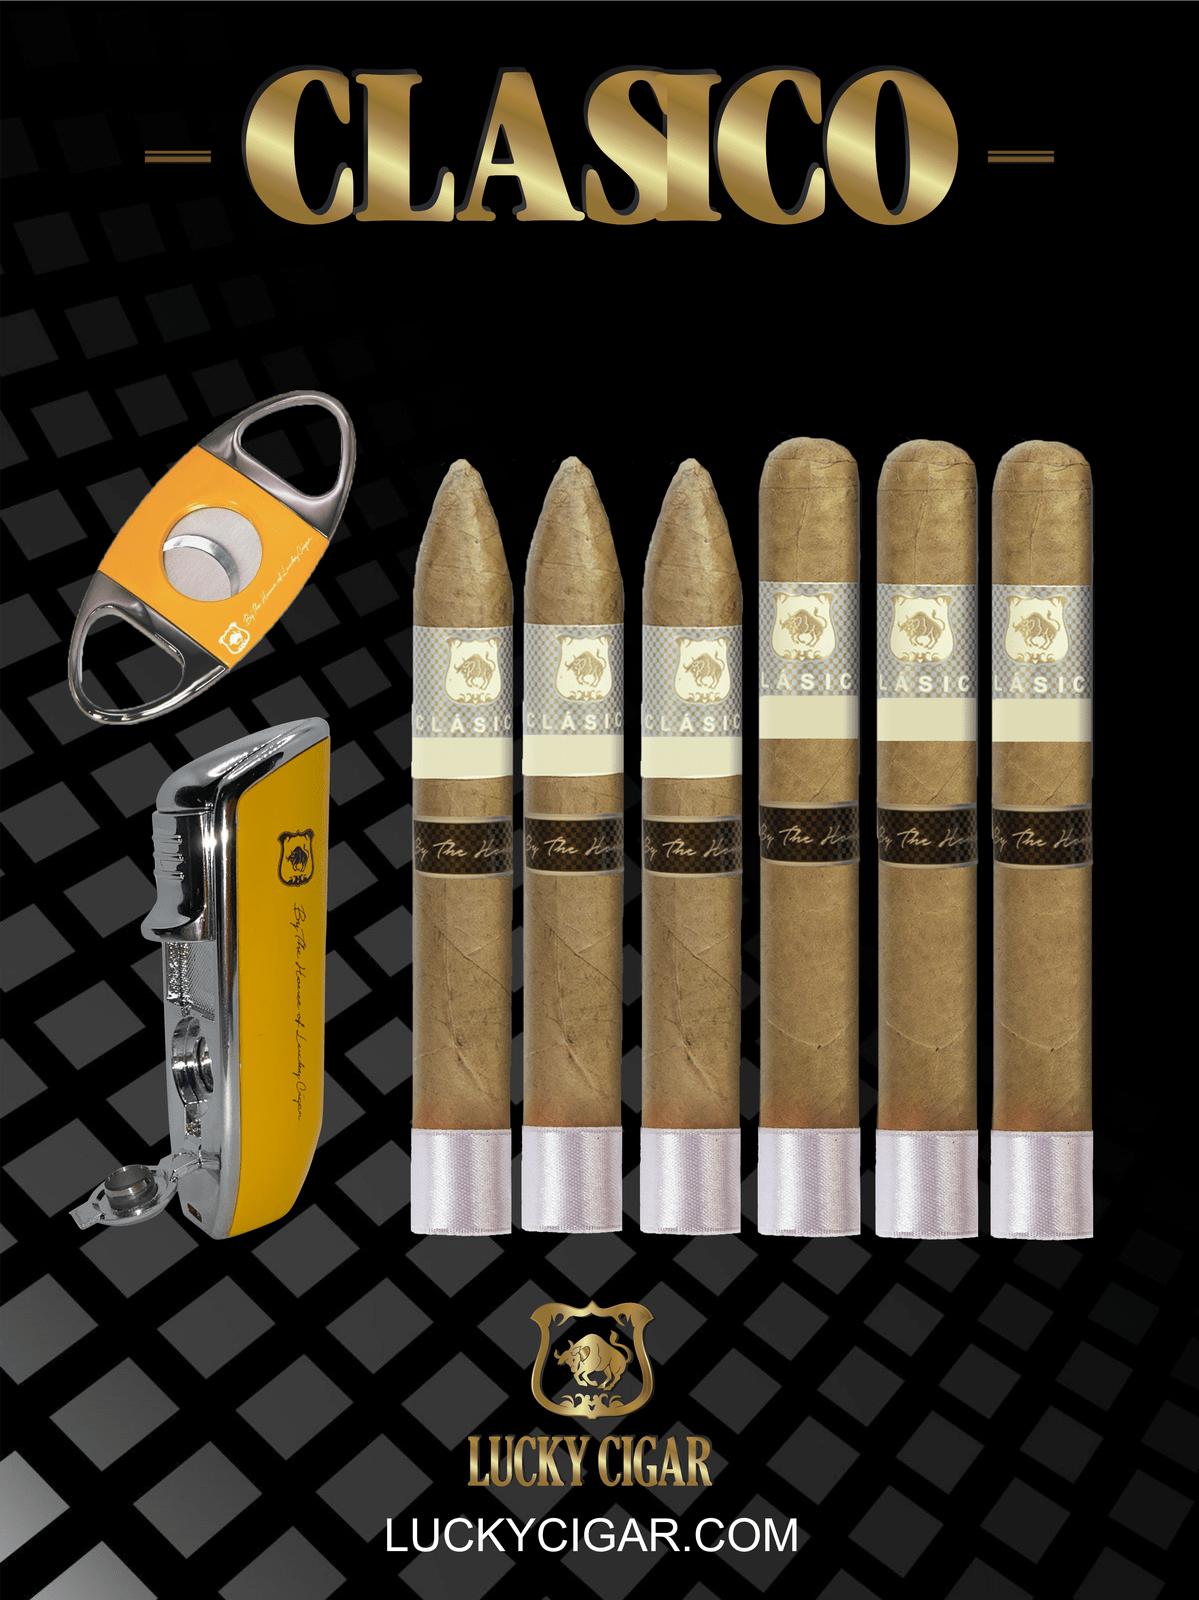 Classic Cigars - Classico by Lucky Cigar: Set of 6 Cigars, 3 Torpedo, 3 Toro with Cutter, Torch